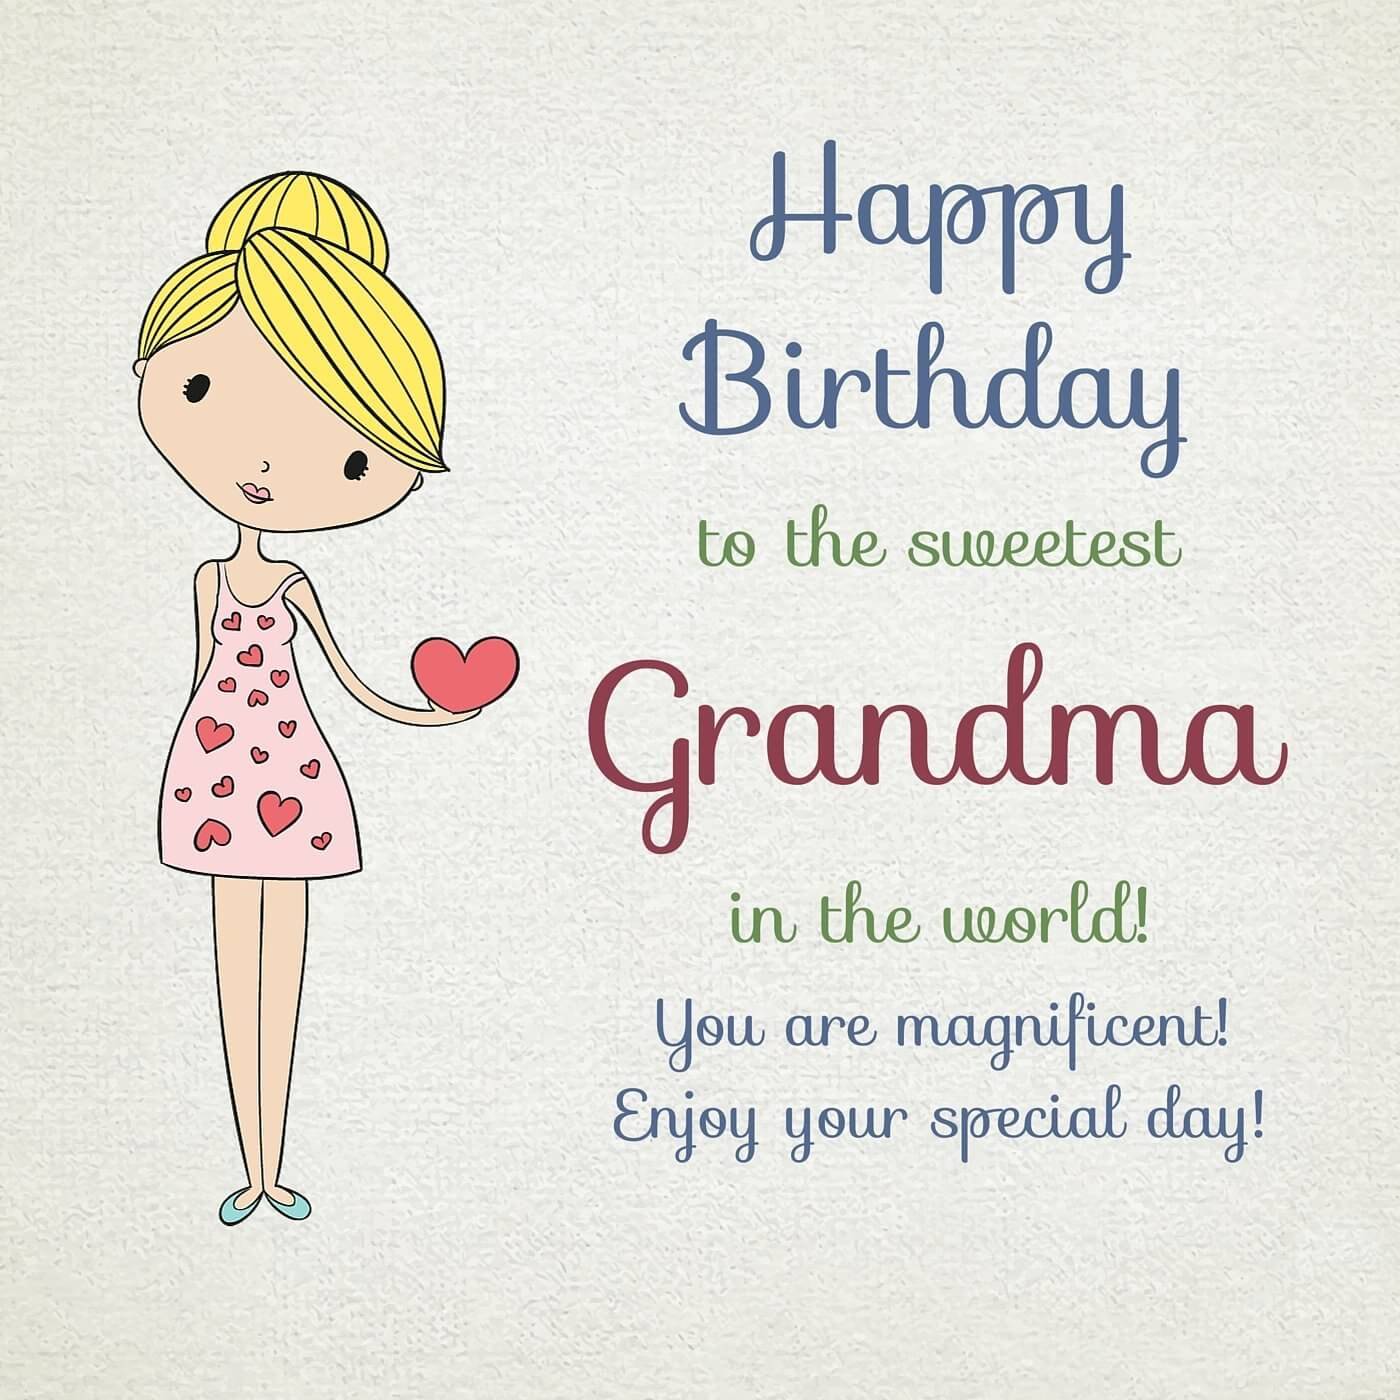 50+ Happy Birthday Wishes for Grandmother – Quotes, Cake Images, Messages, Greeting Cards.